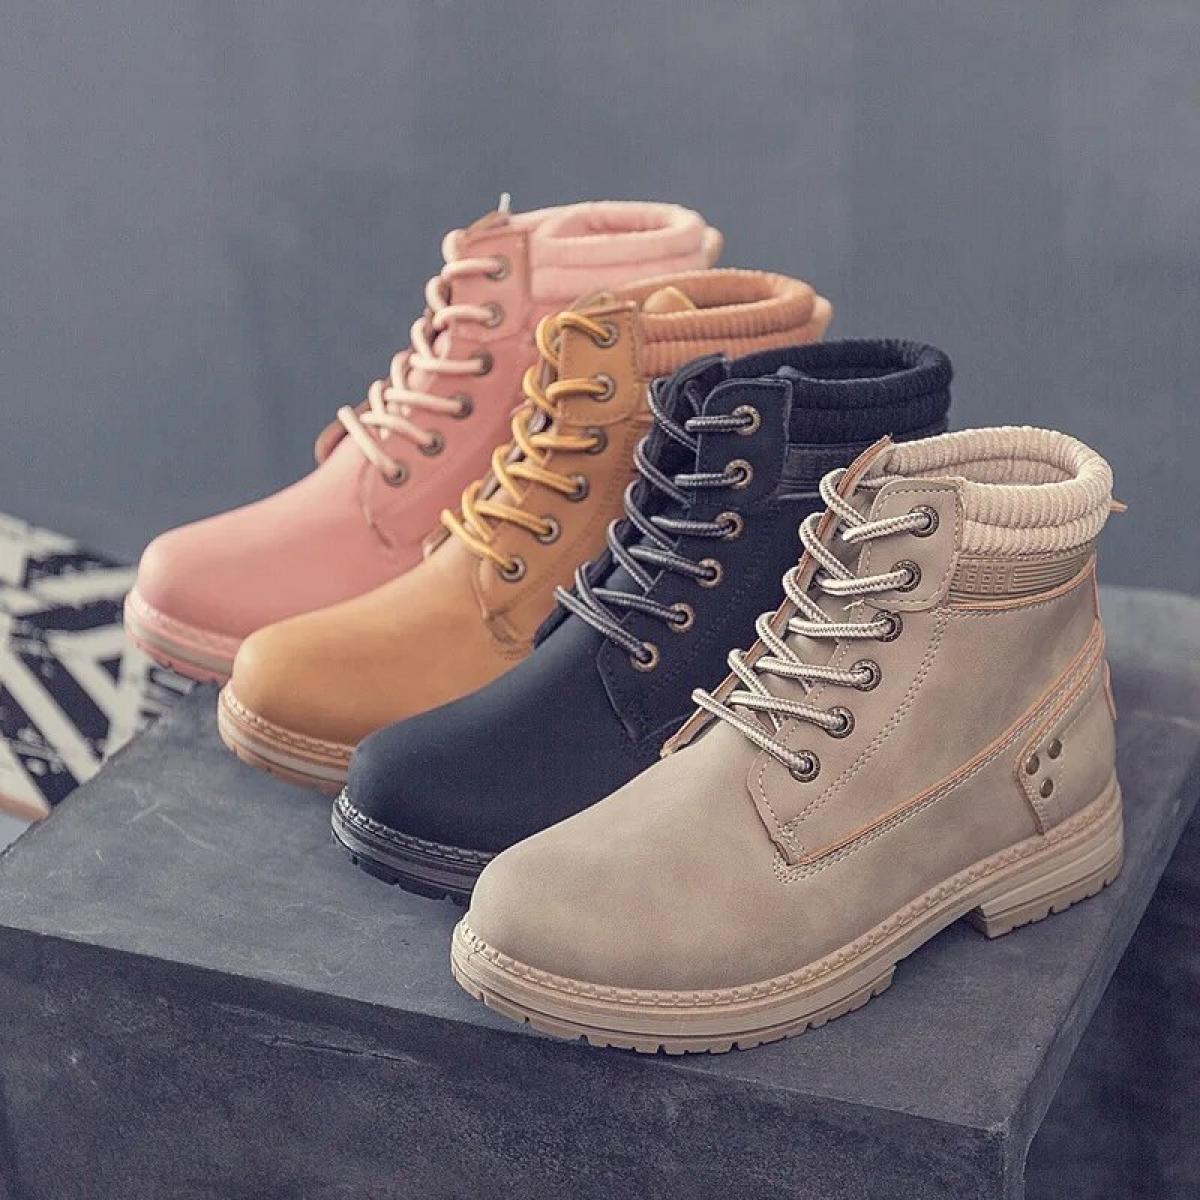 2022 Ankle Boots Women Winter  Plush Warm Waterproof Short Motorcycle Boots Women's Cotton Shoes Snow Snow Boots Boots